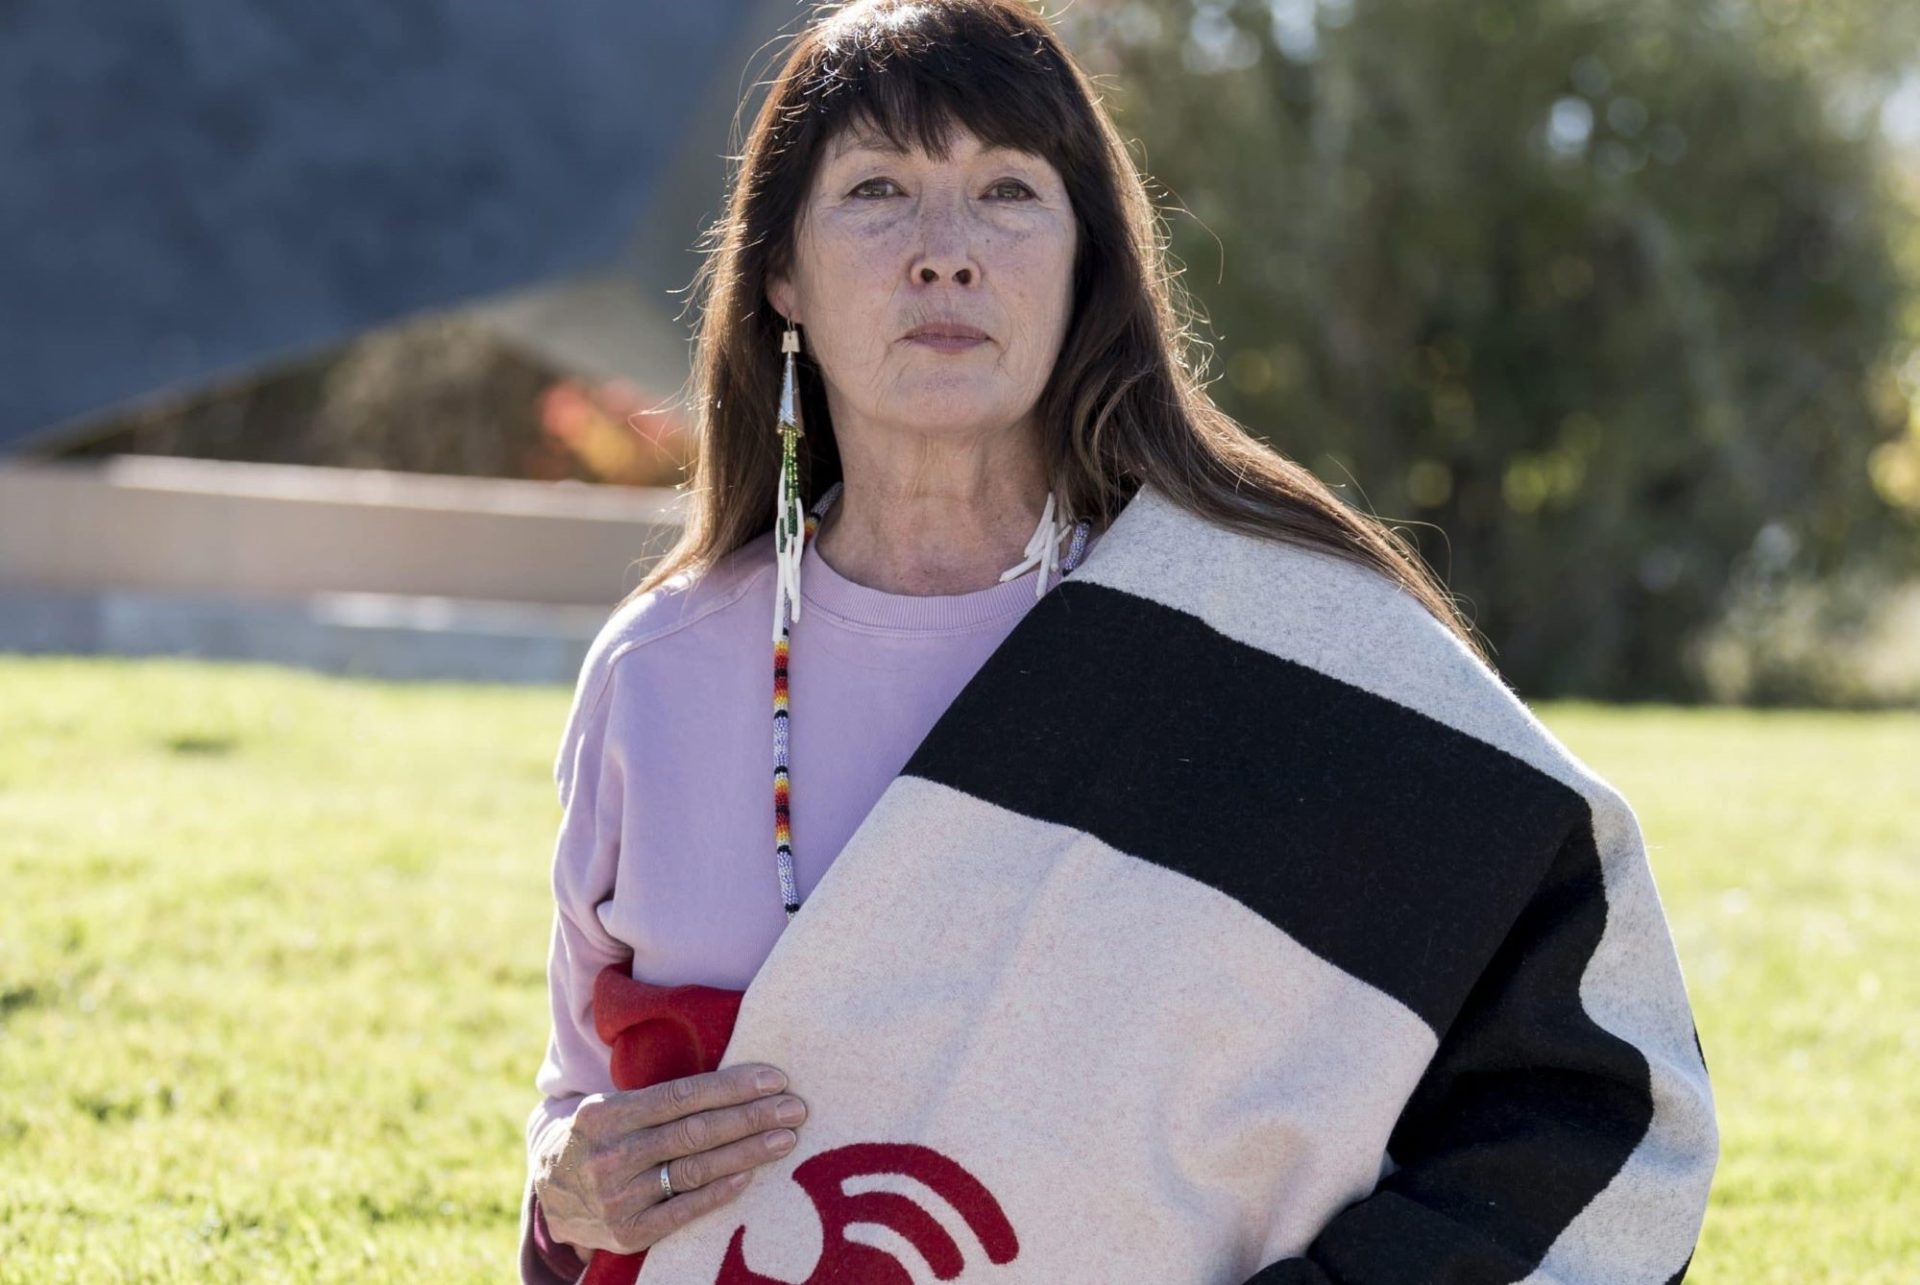 An indigenious woman with long dark hair, with a native blanket draped over one shoulder